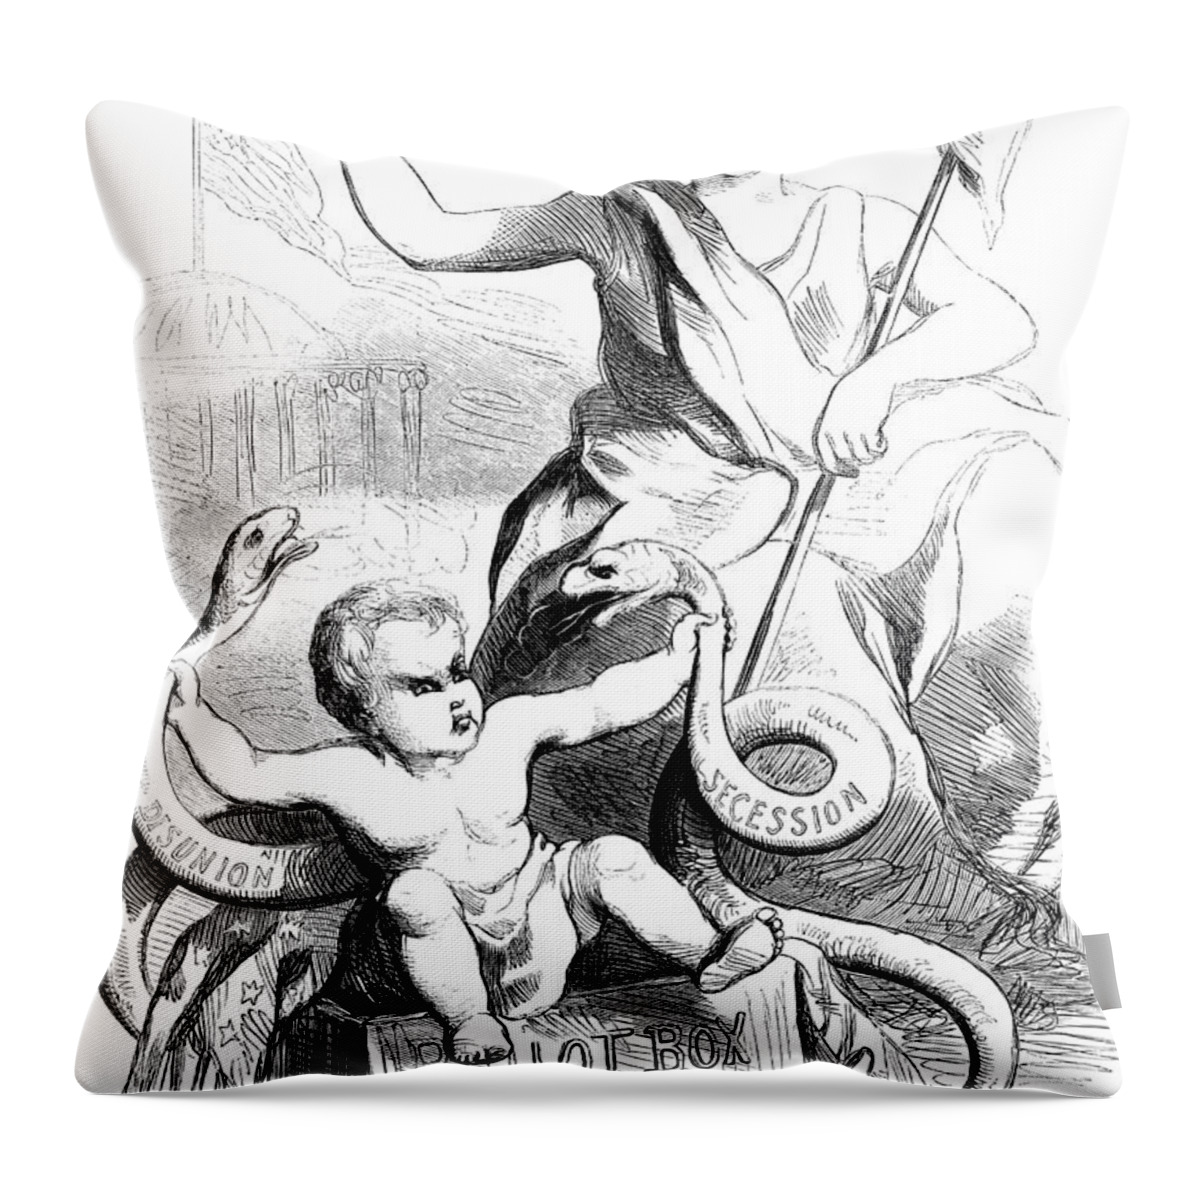 1860 Throw Pillow featuring the photograph Secession Cartoon, 1860 by Granger